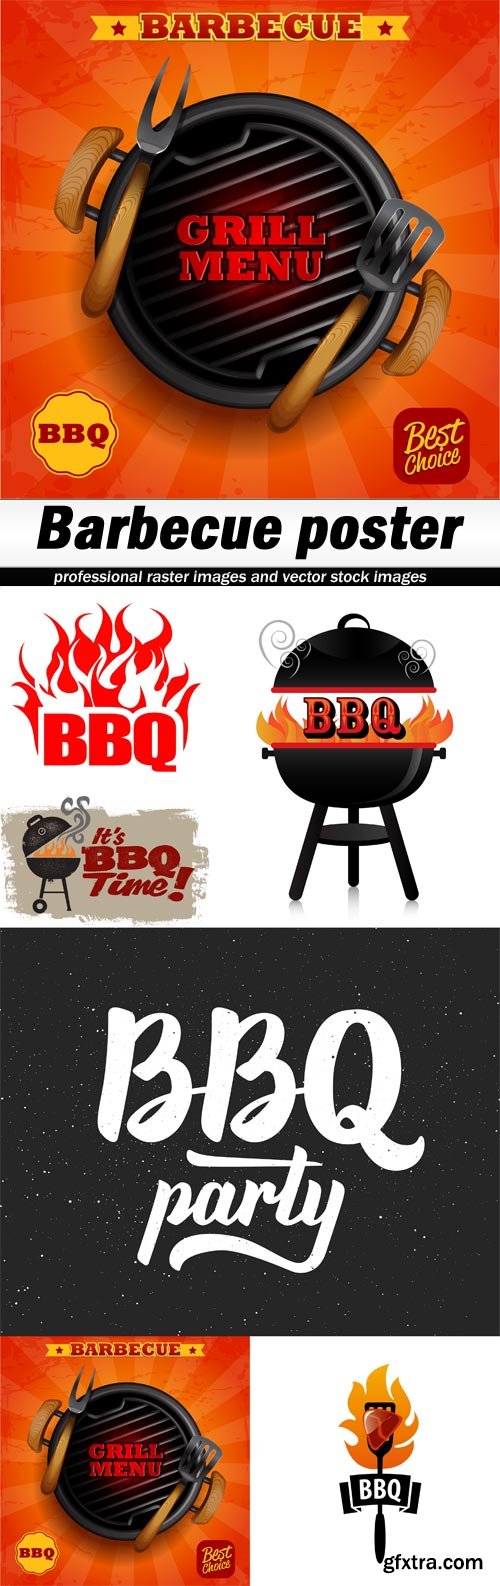 Barbecue poster - 6 UHQ JPEG